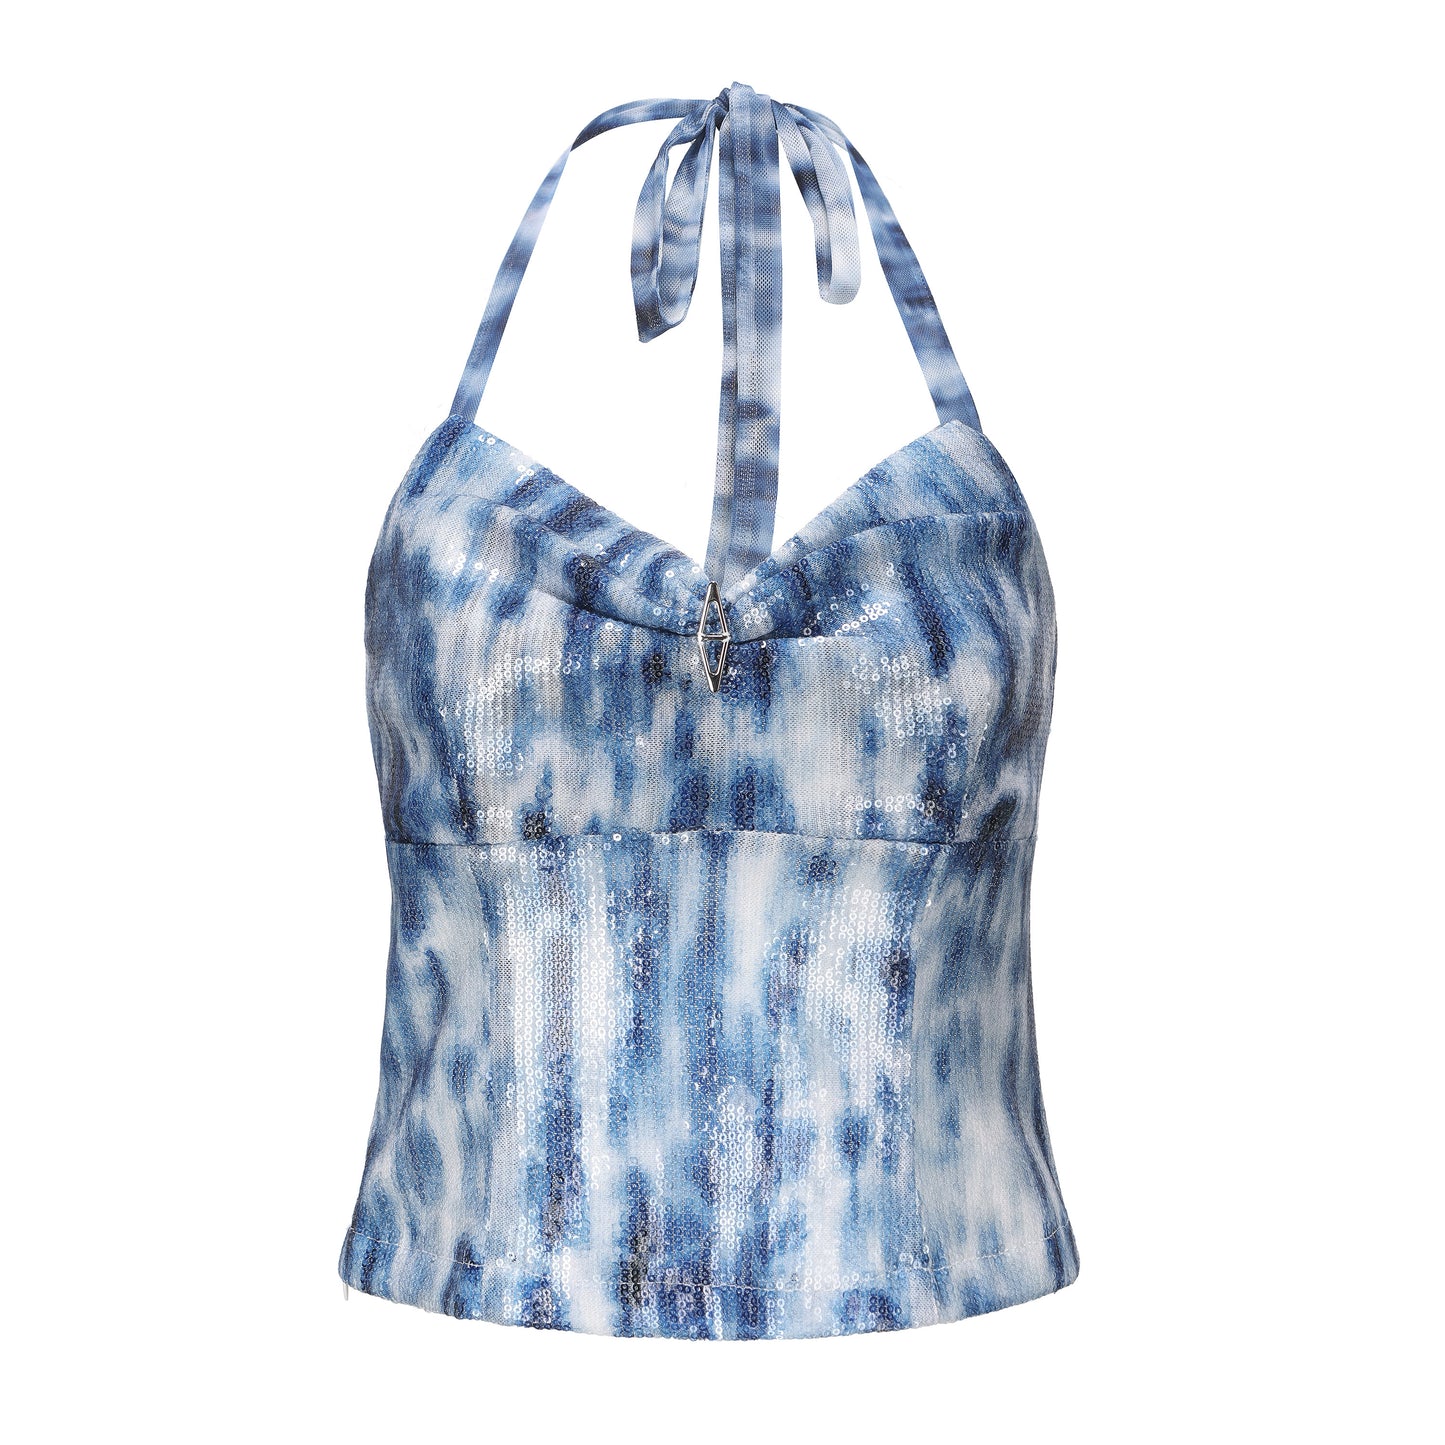 Blue and White Sequined Halterneck Camisole Top with Elastic